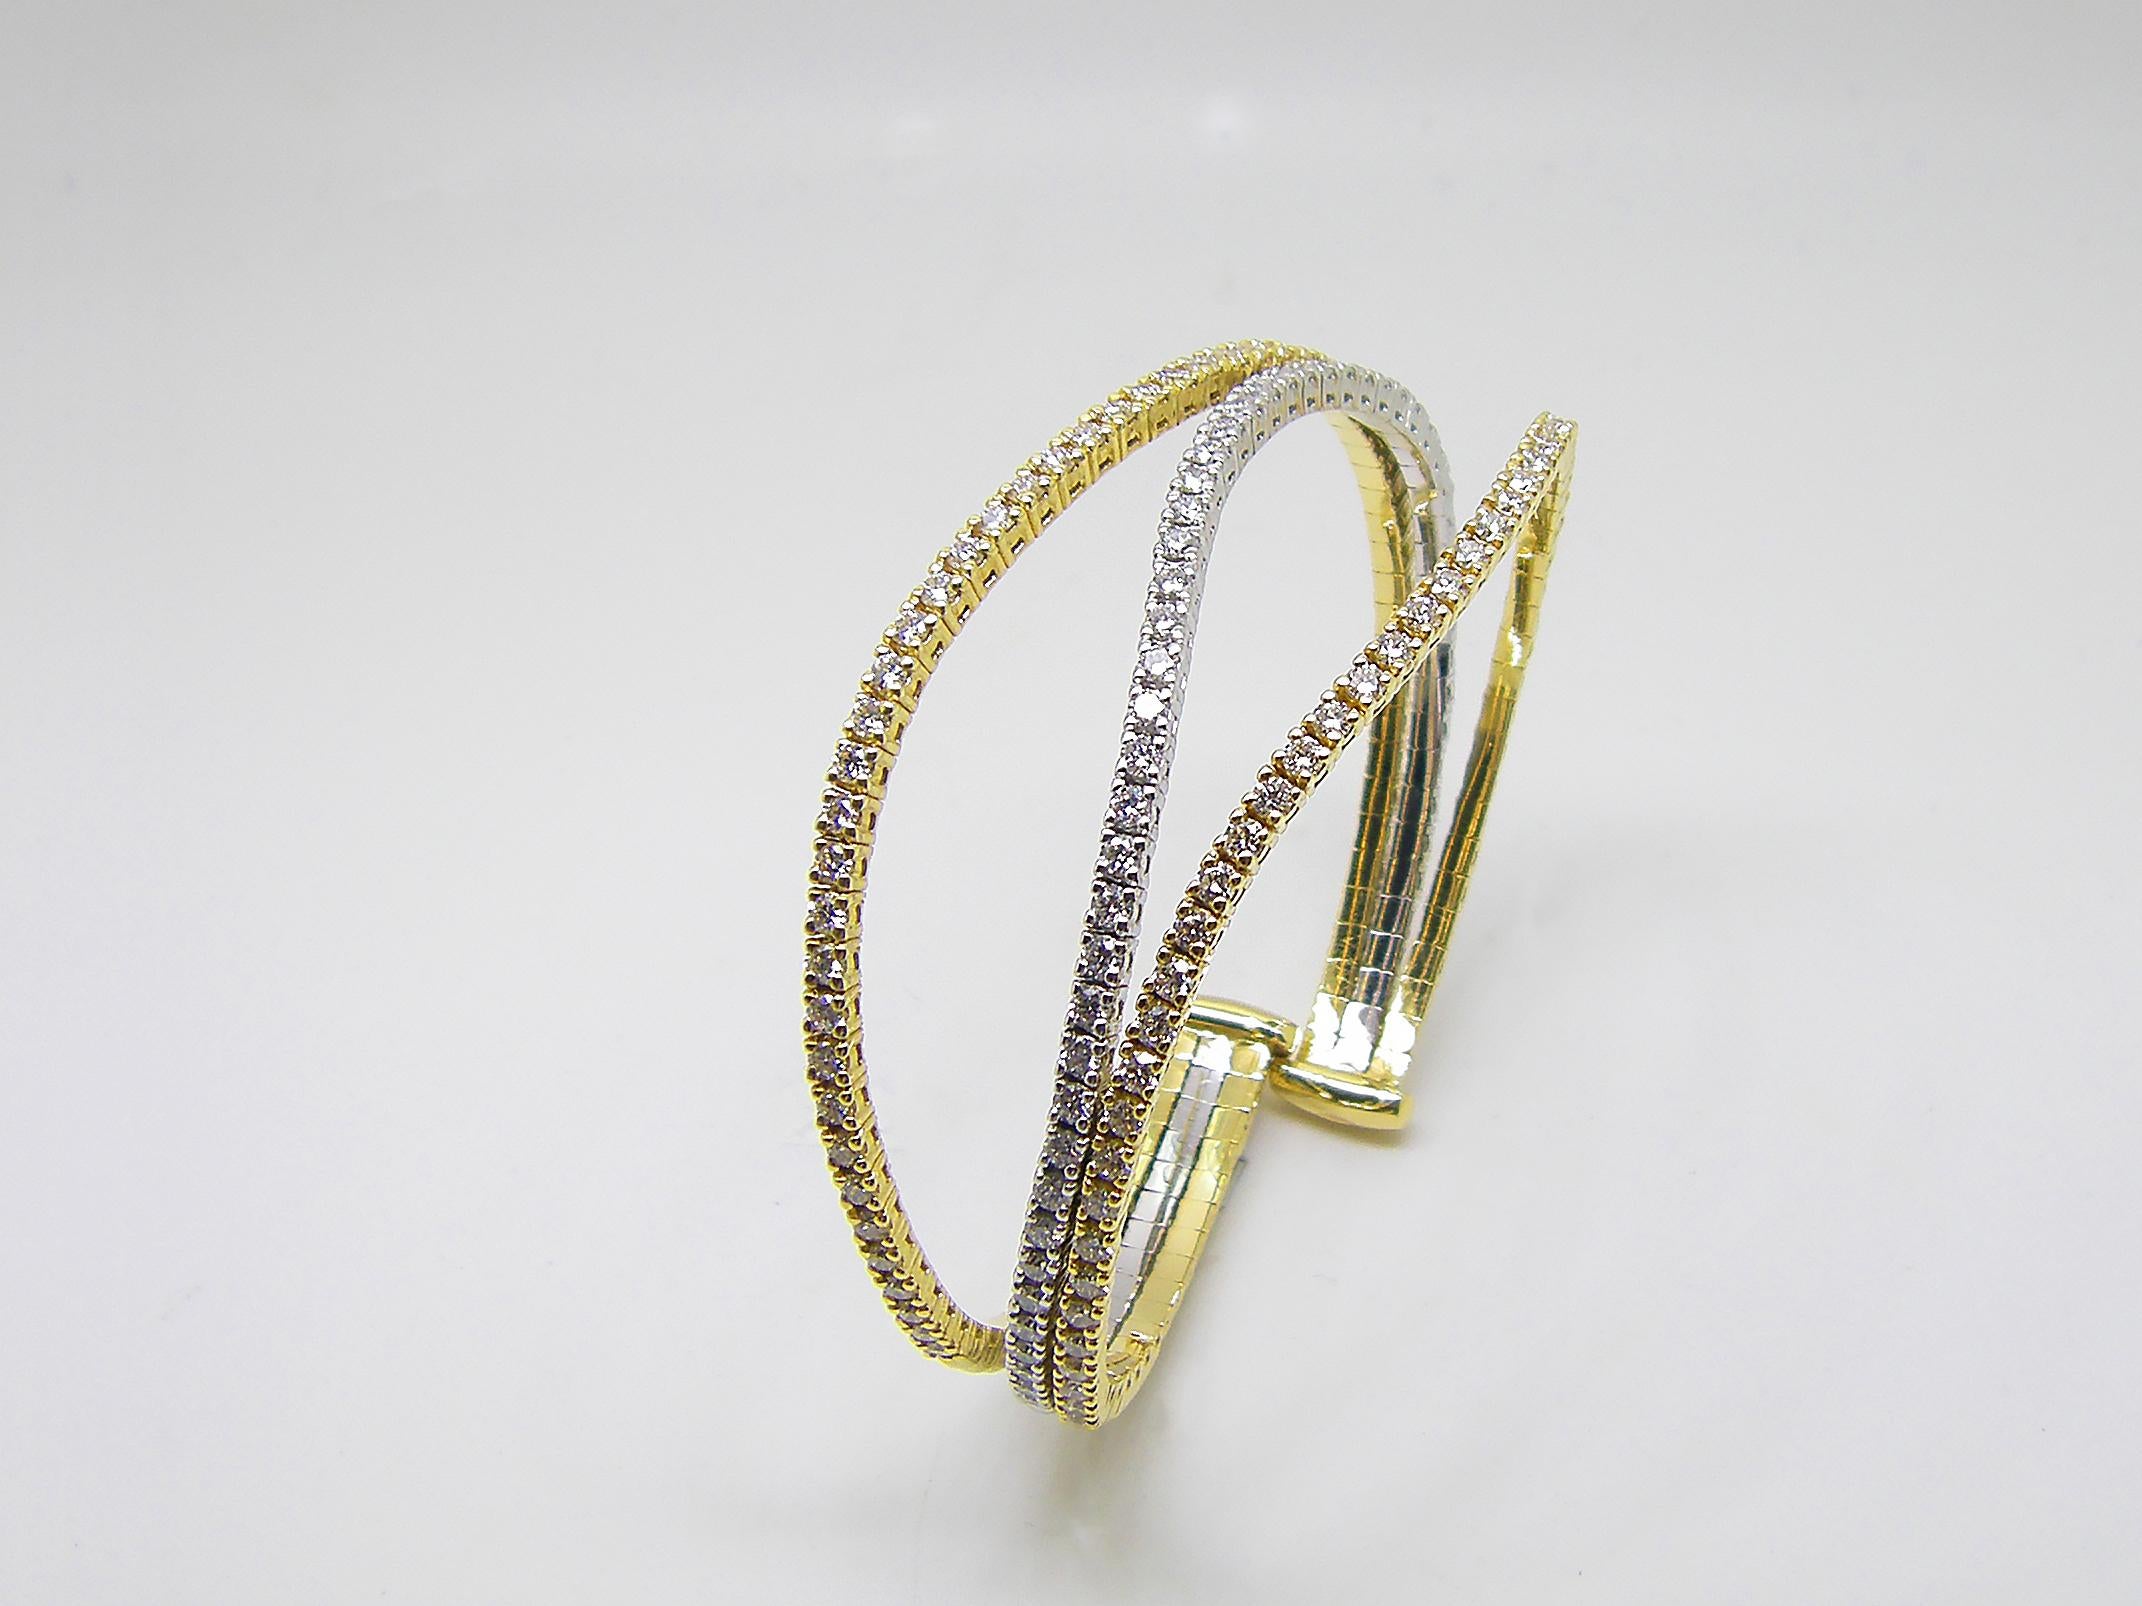 S.Georgios designer flexible bangle cuff bracelet is custom made of Yellow and White gold 18 karats. The gorgeous cuff has brilliant cut white diamonds total weight of 3.52 Carat set microscopically.
We also make this stunning piece in all White,